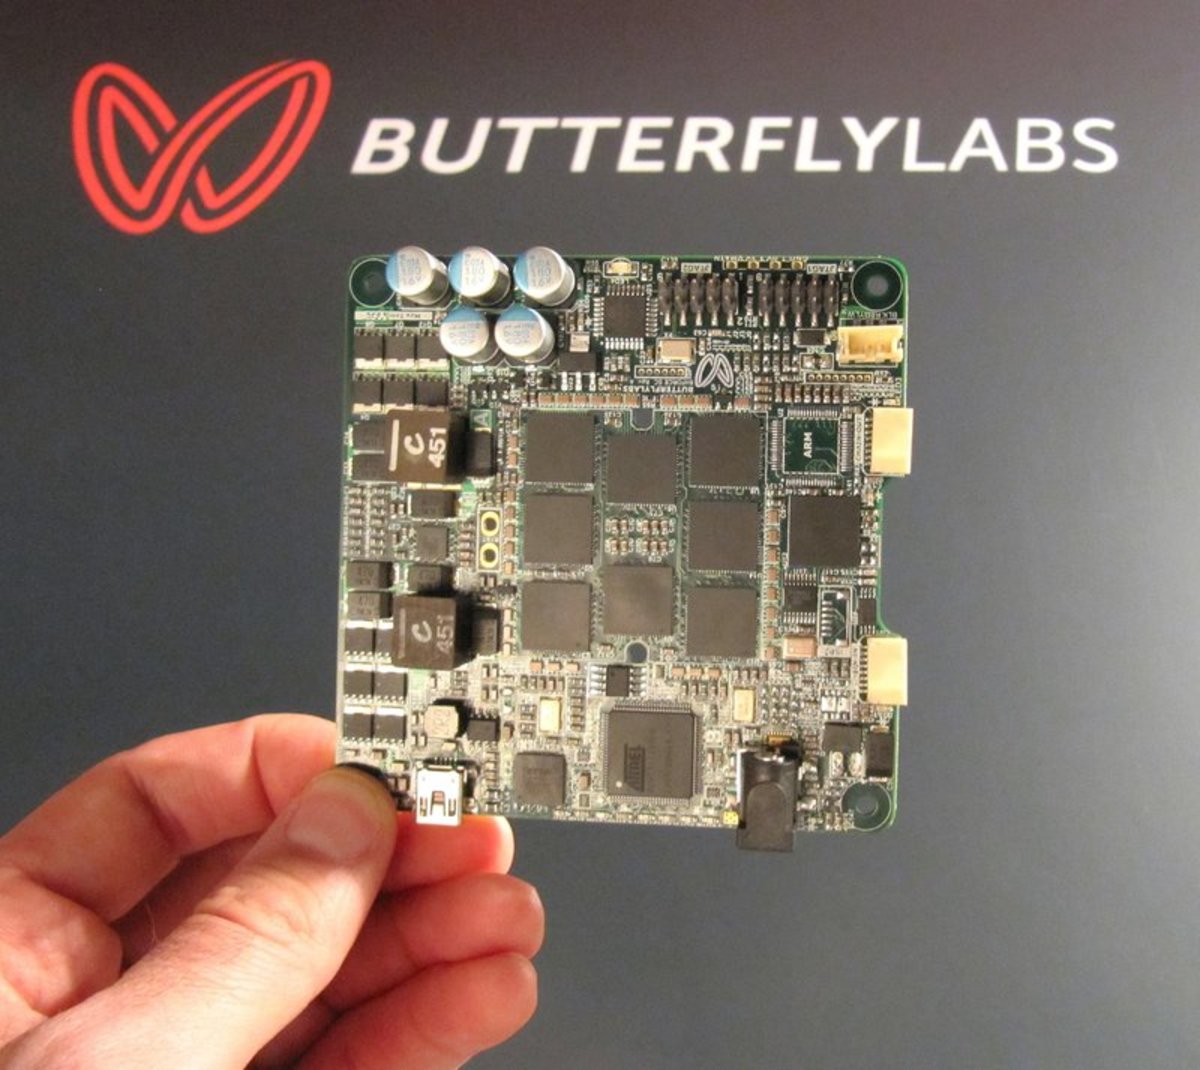 Op-ed - Butterfly Labs Releases More ASIC Photos